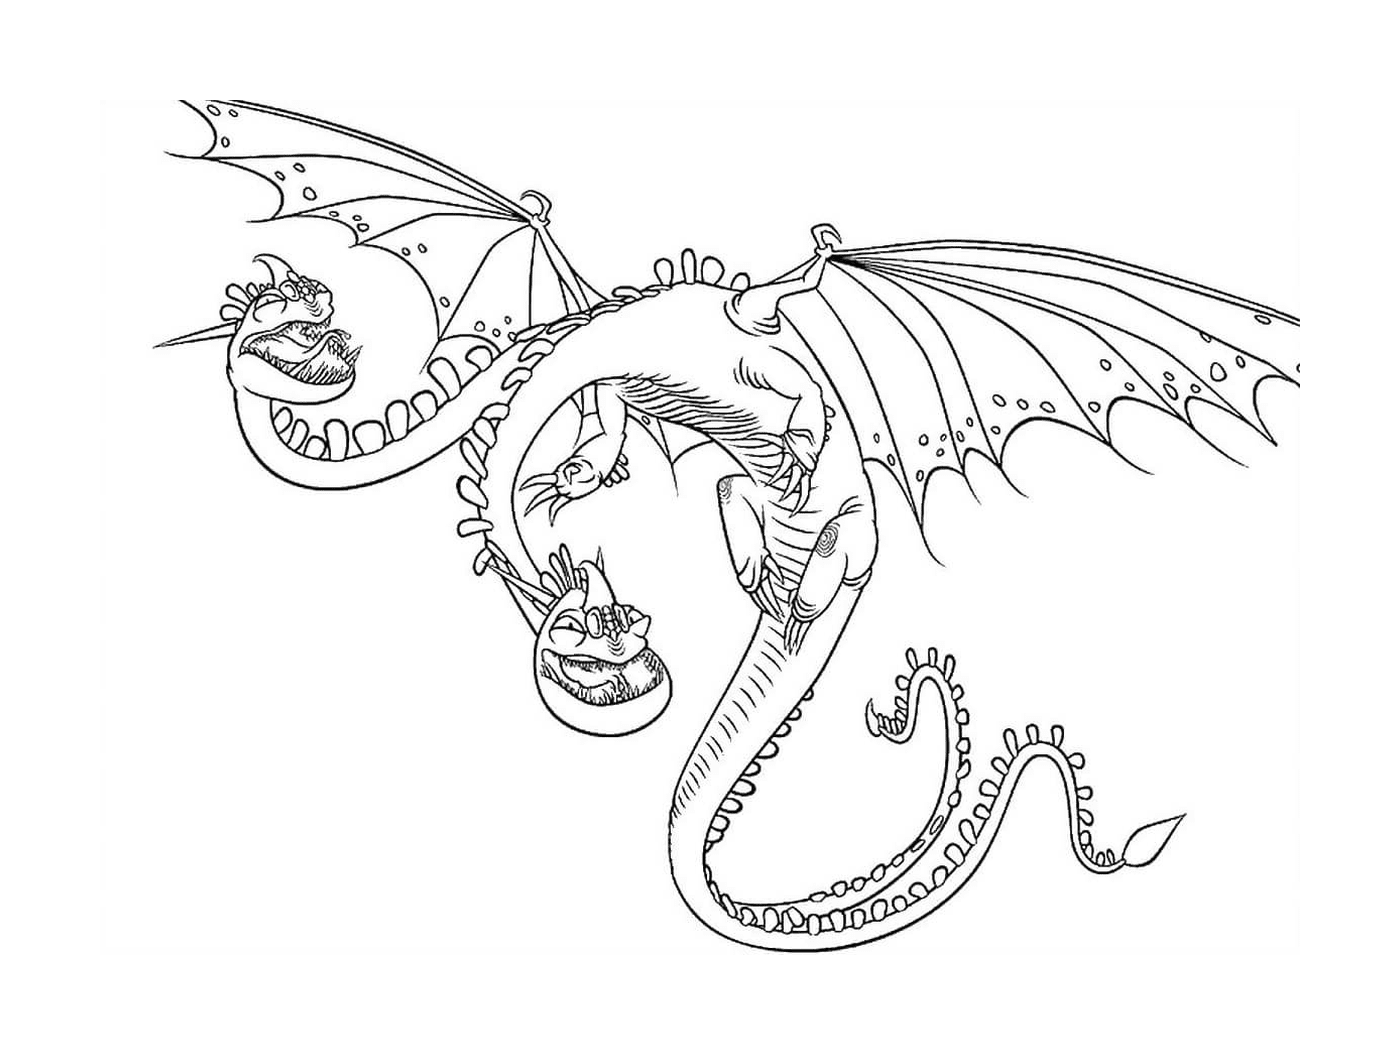  Barf and Belch, a dragon eating 